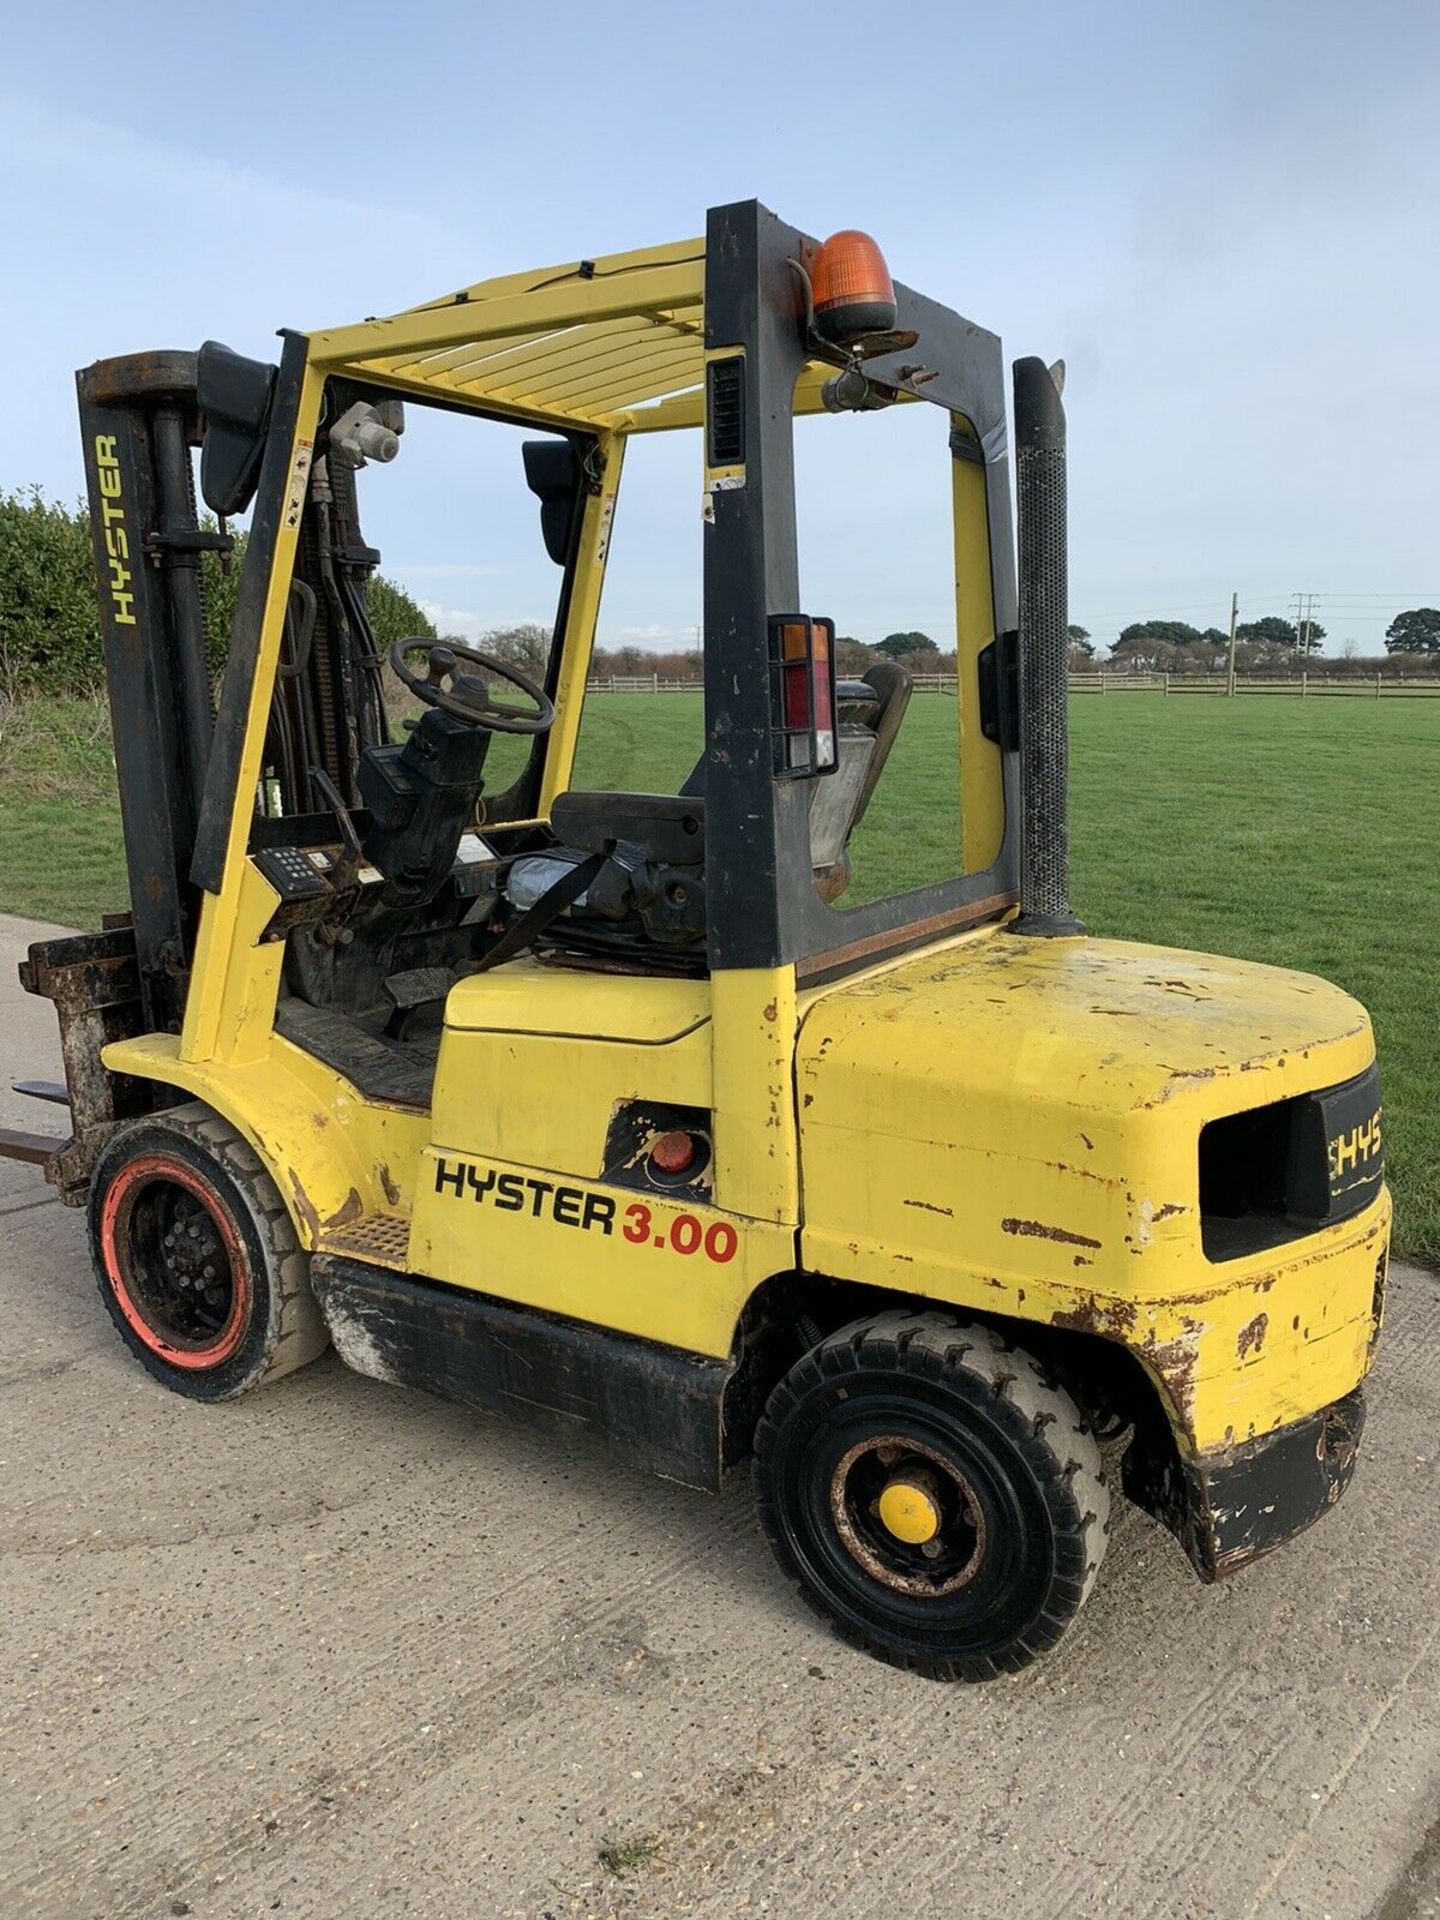 Hyster 3 Tonne Diesel Forklift 4.7 Container Spec - Image 6 of 6